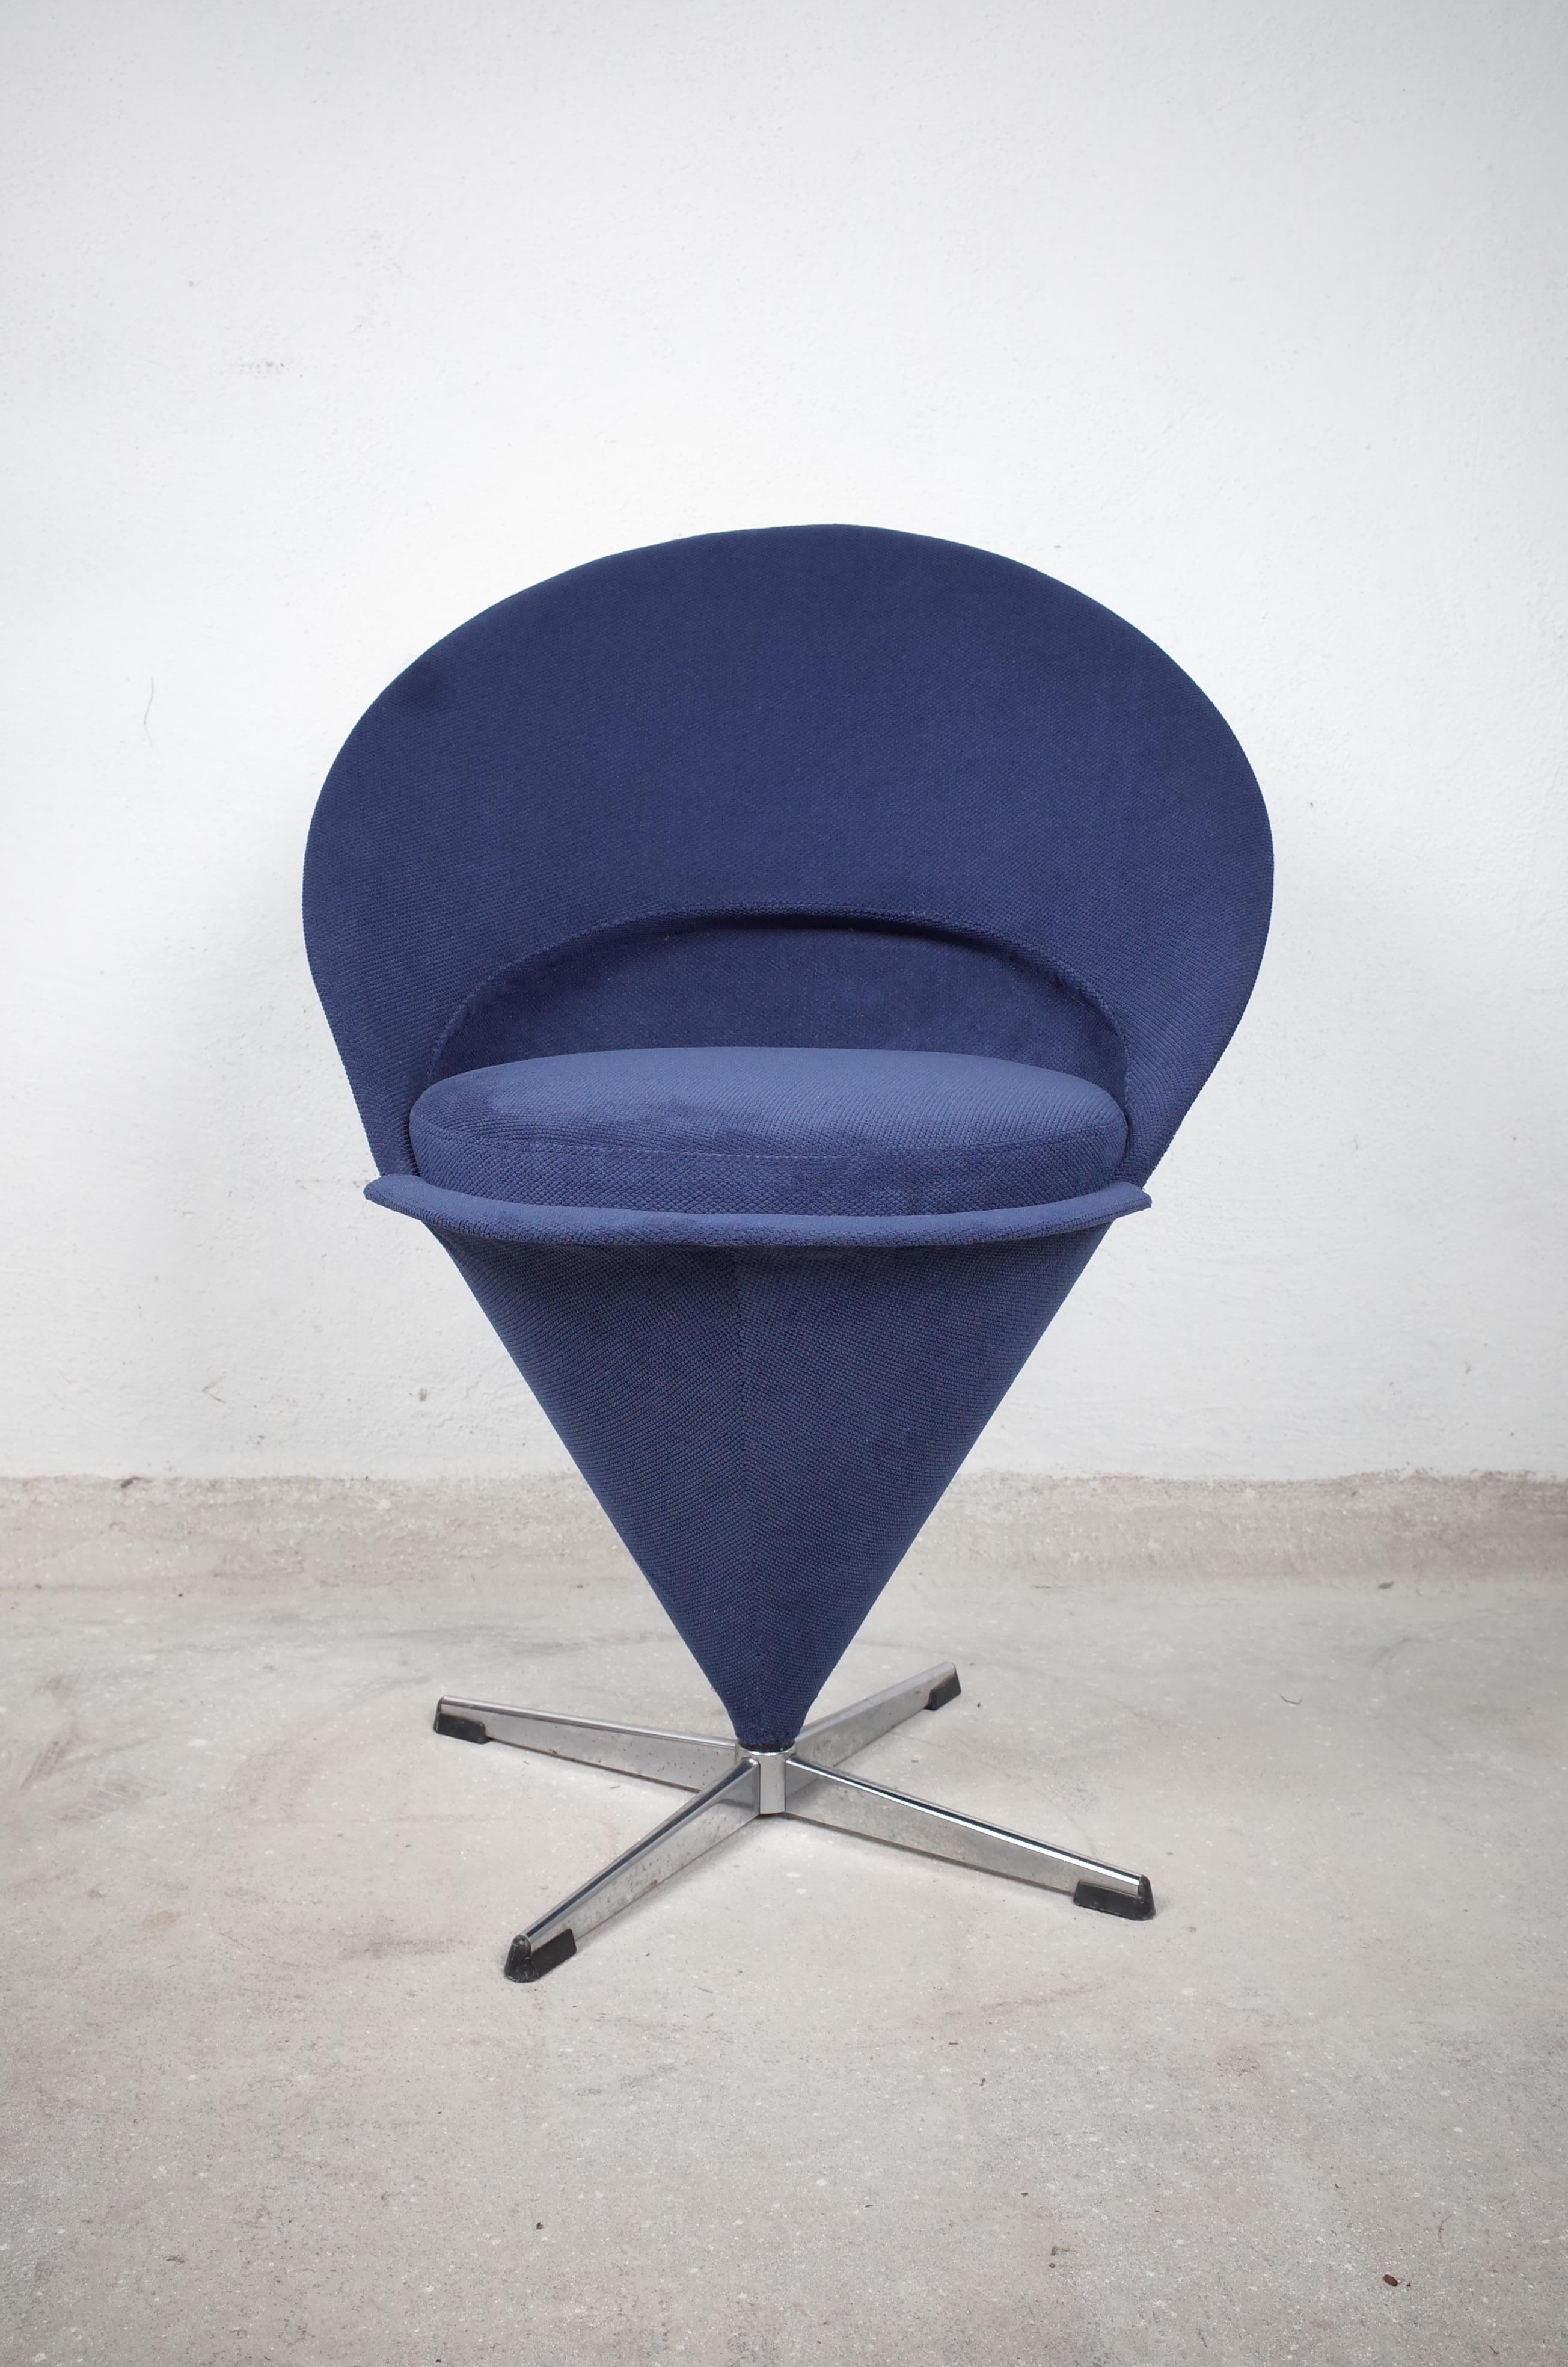 Metal Midcentury Blue Cone Chair by Verner Panton, 1960s For Sale